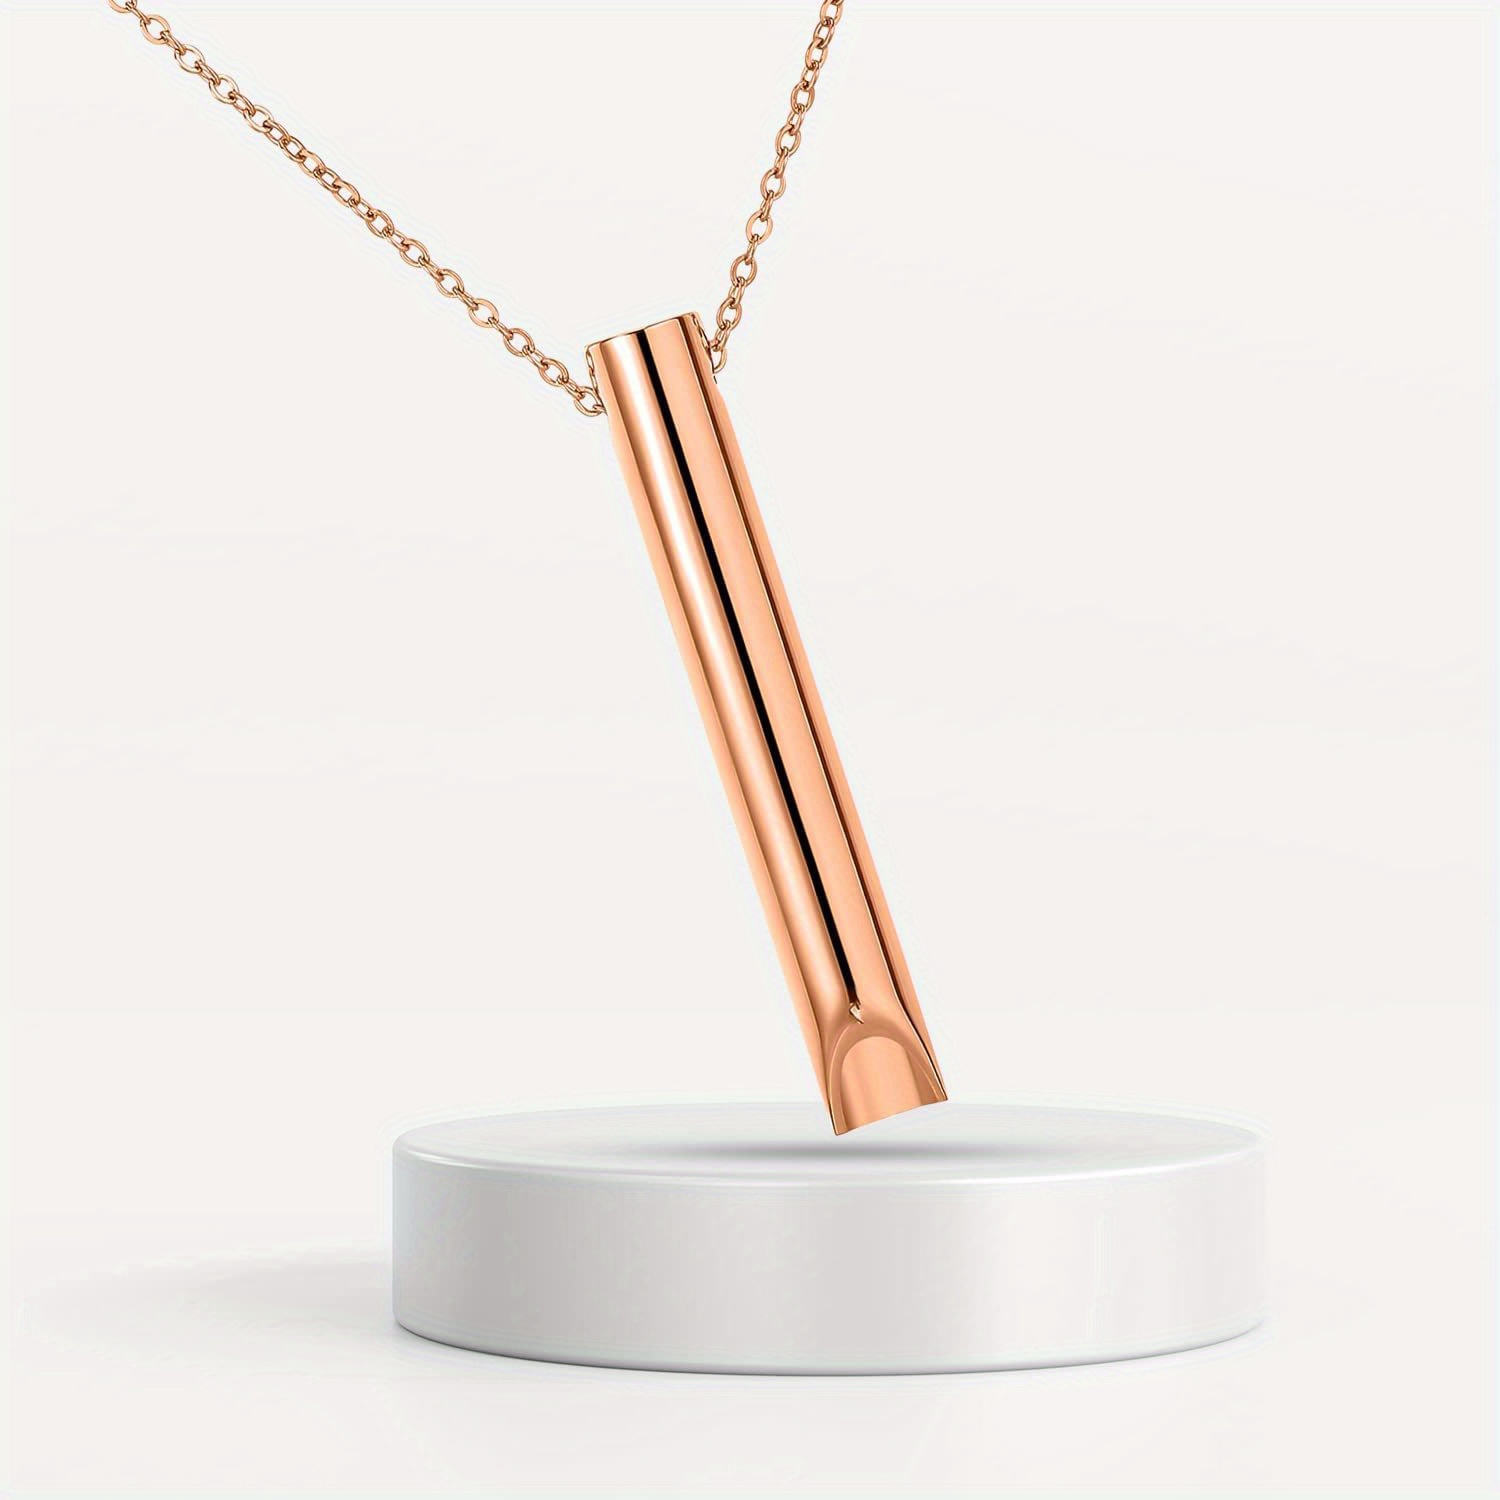 Haigivesoon Anxiety Necklace,Mindful Breathing Necklace Meditation  Accessories with Rose Gold Plated for Stress and Relaxation ,Anxiety Relief  Items Stress Relief Gifts for Woman Man (ROSE GOLD) - Coupon Codes, Promo  Codes, Daily